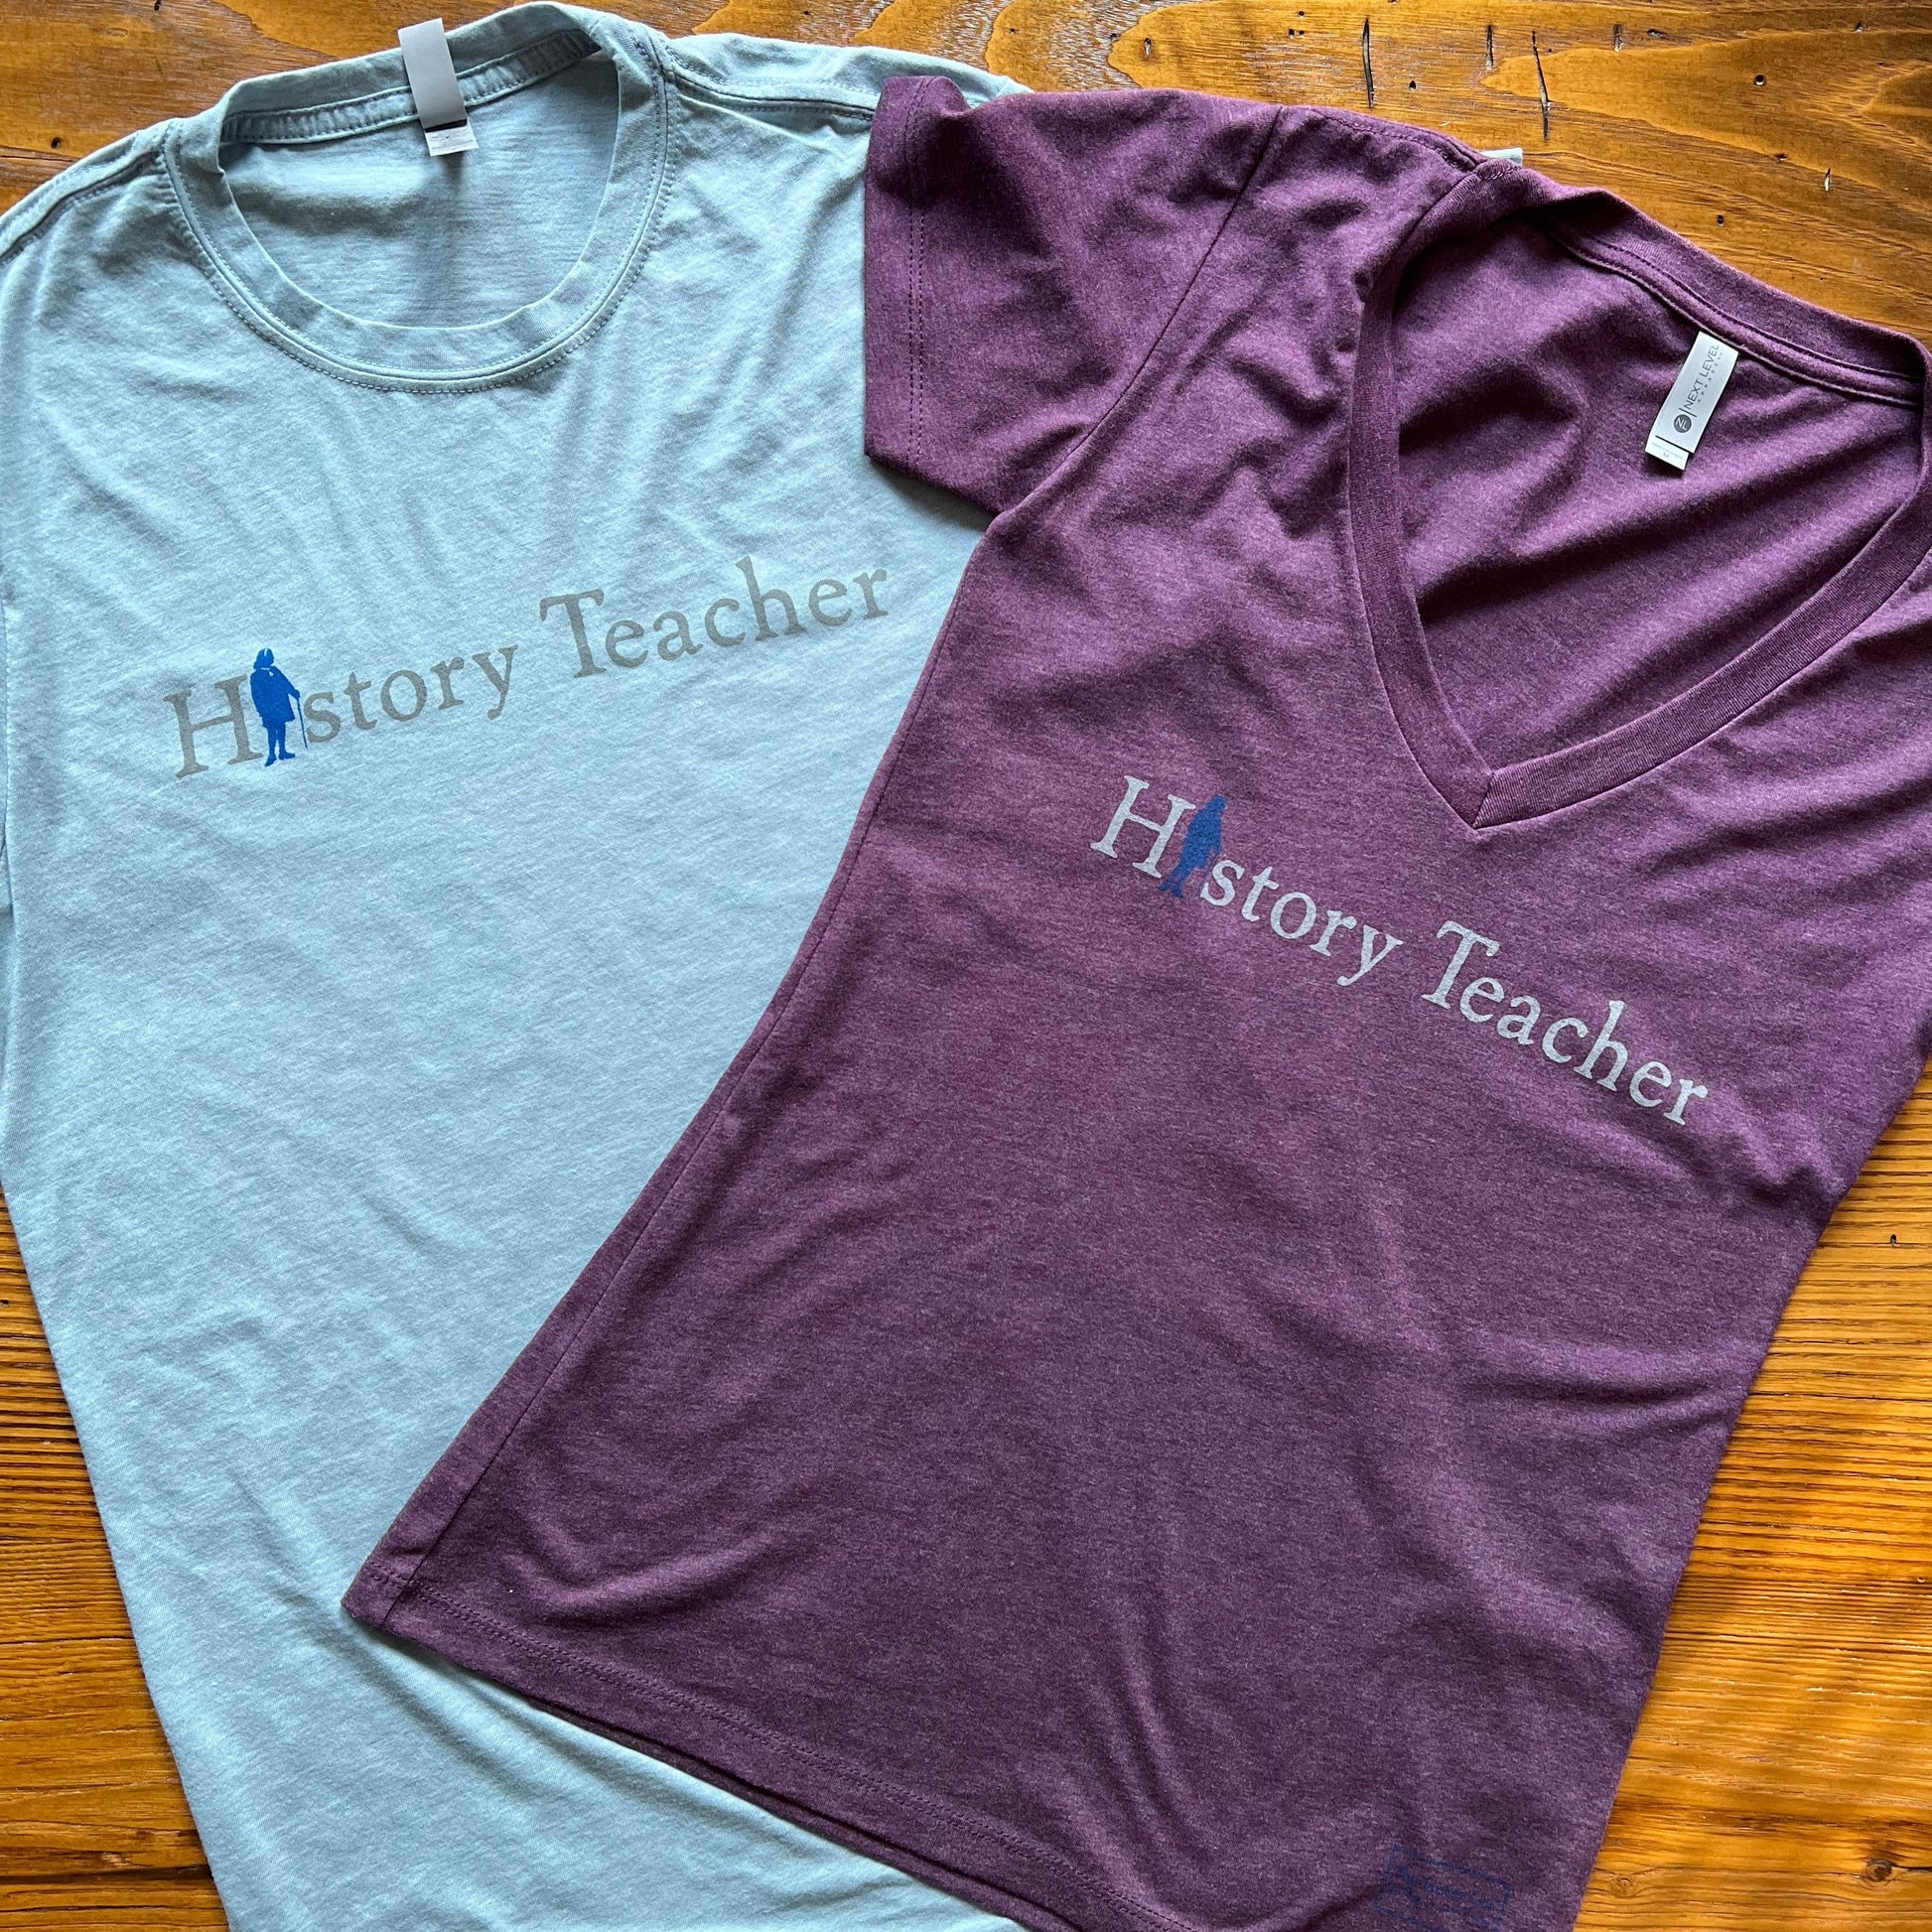 "History Teacher" V-neck T-Shirt with Ben Franklin - Purple from The History List Store